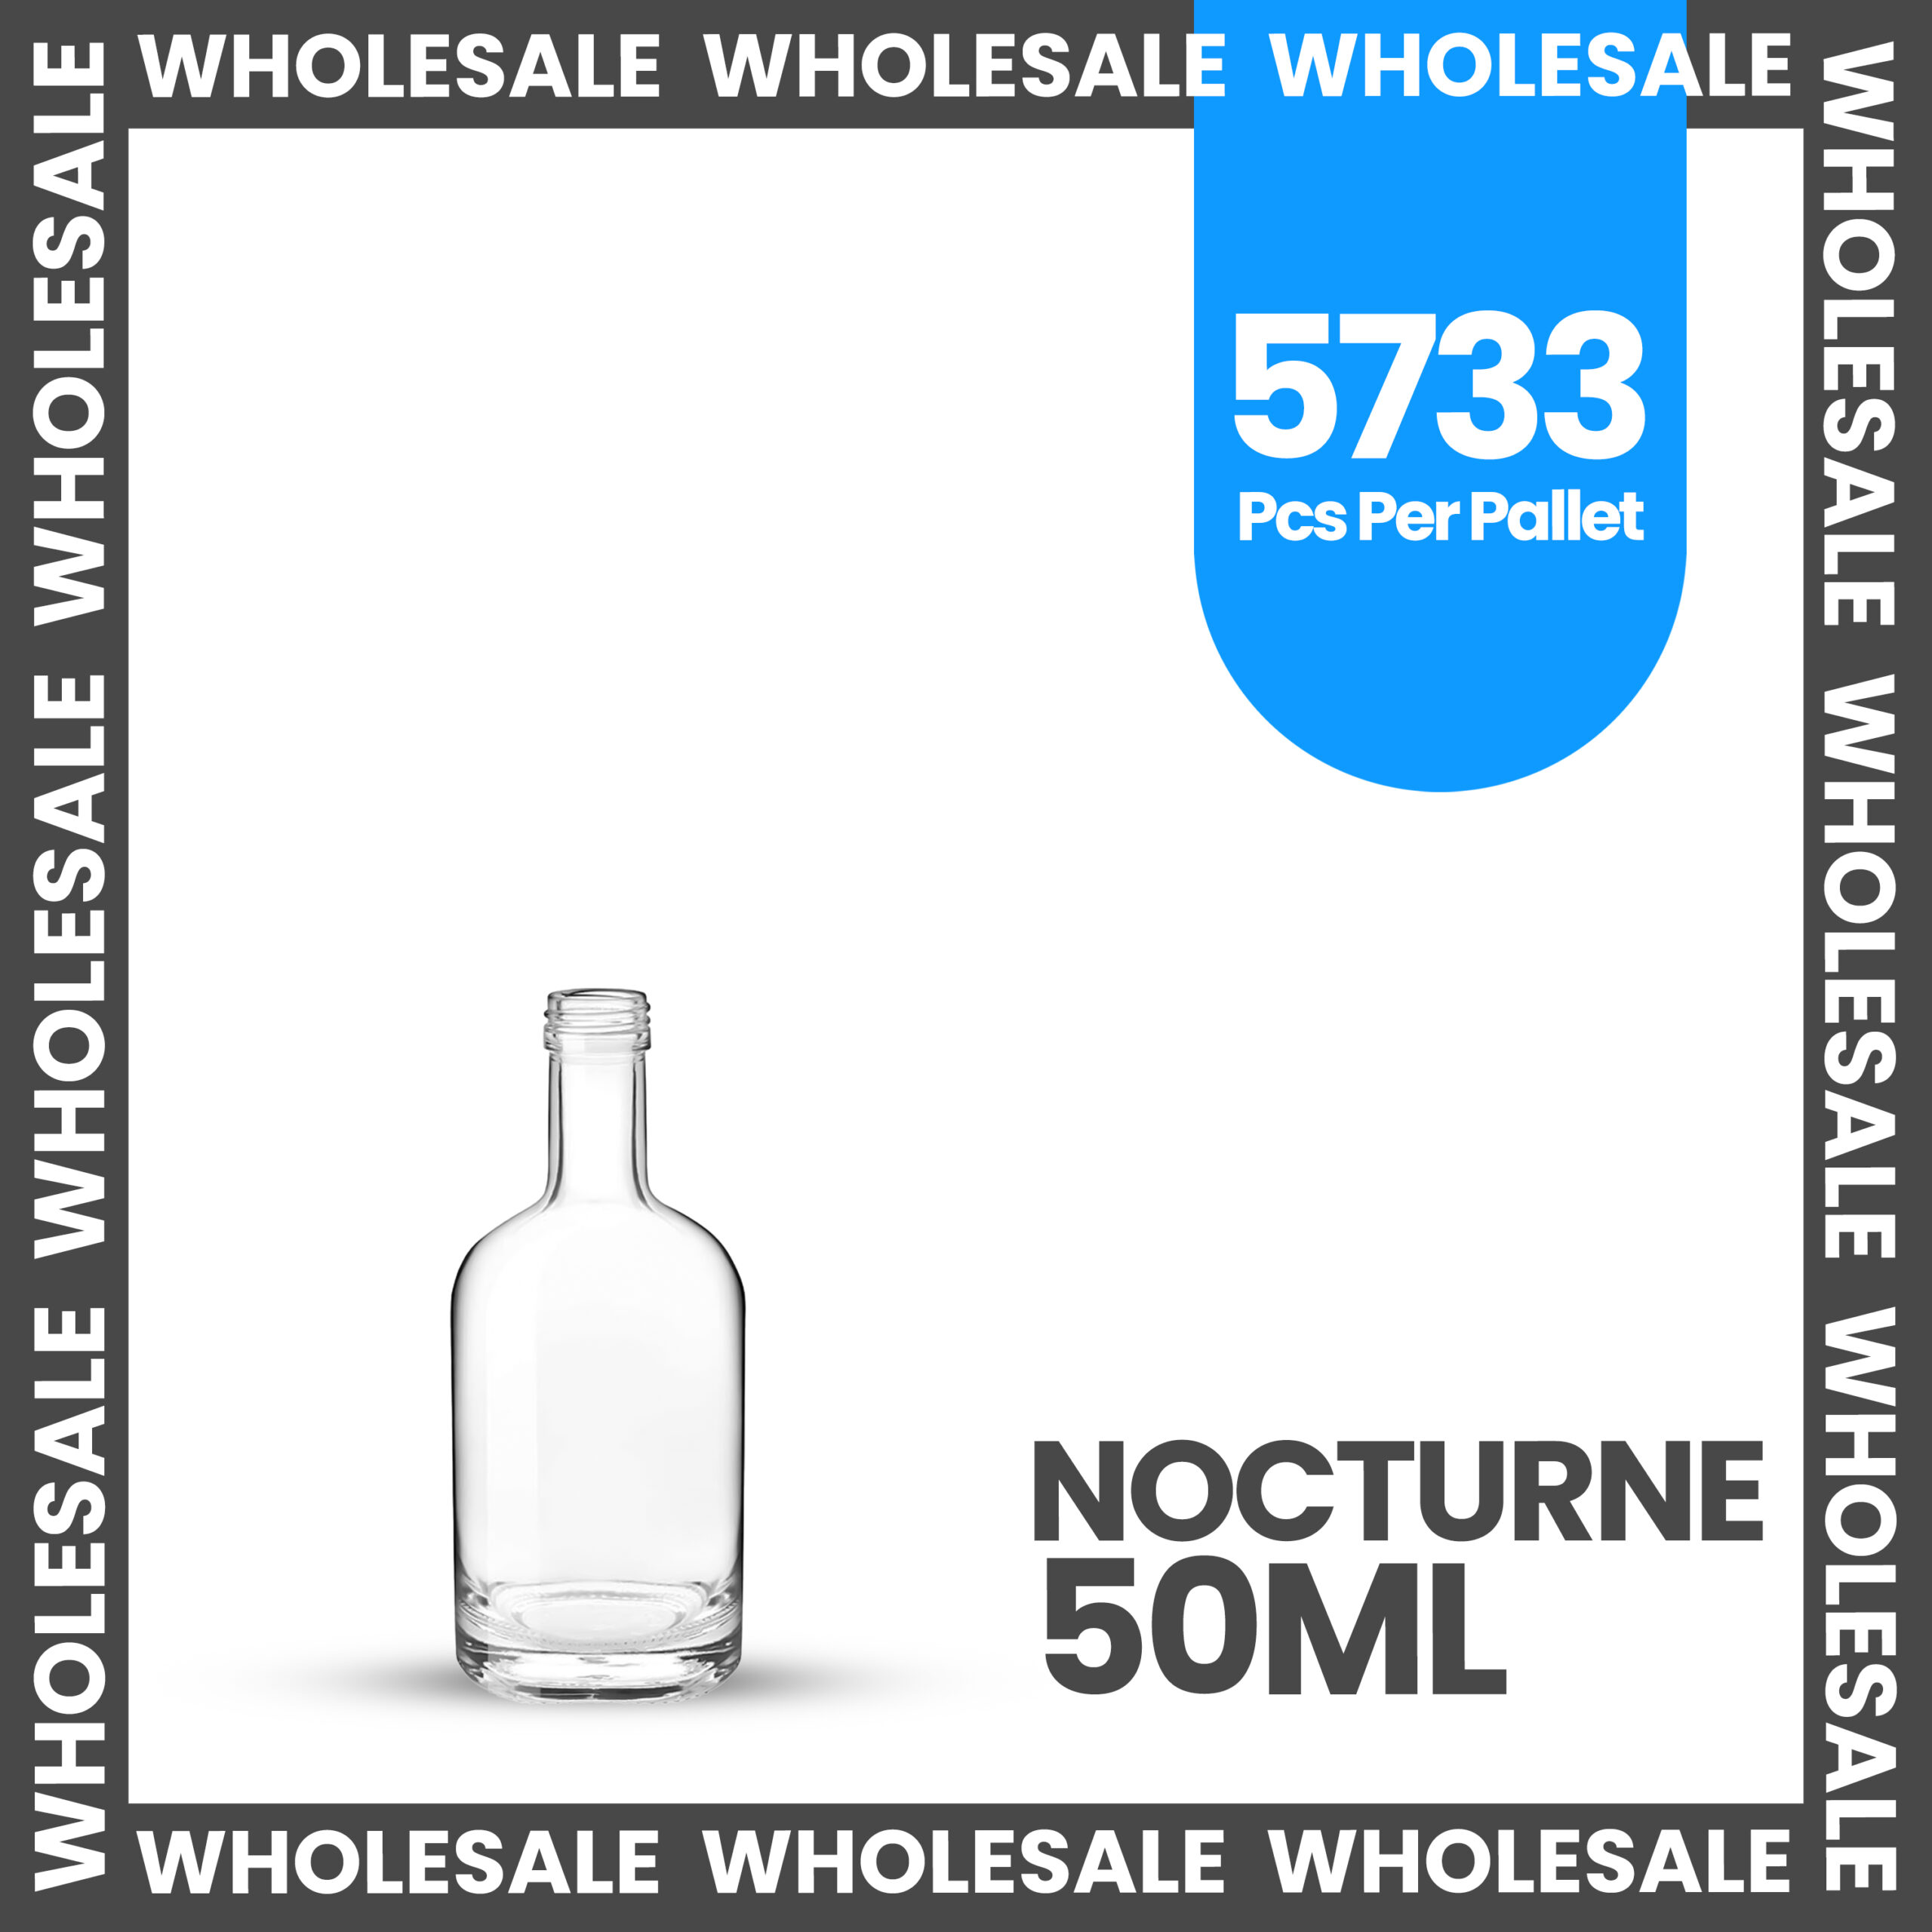 Wholesale repeated around image as a border, image of a bottle called Nocturne 50ml, 5733 pcs per pallet